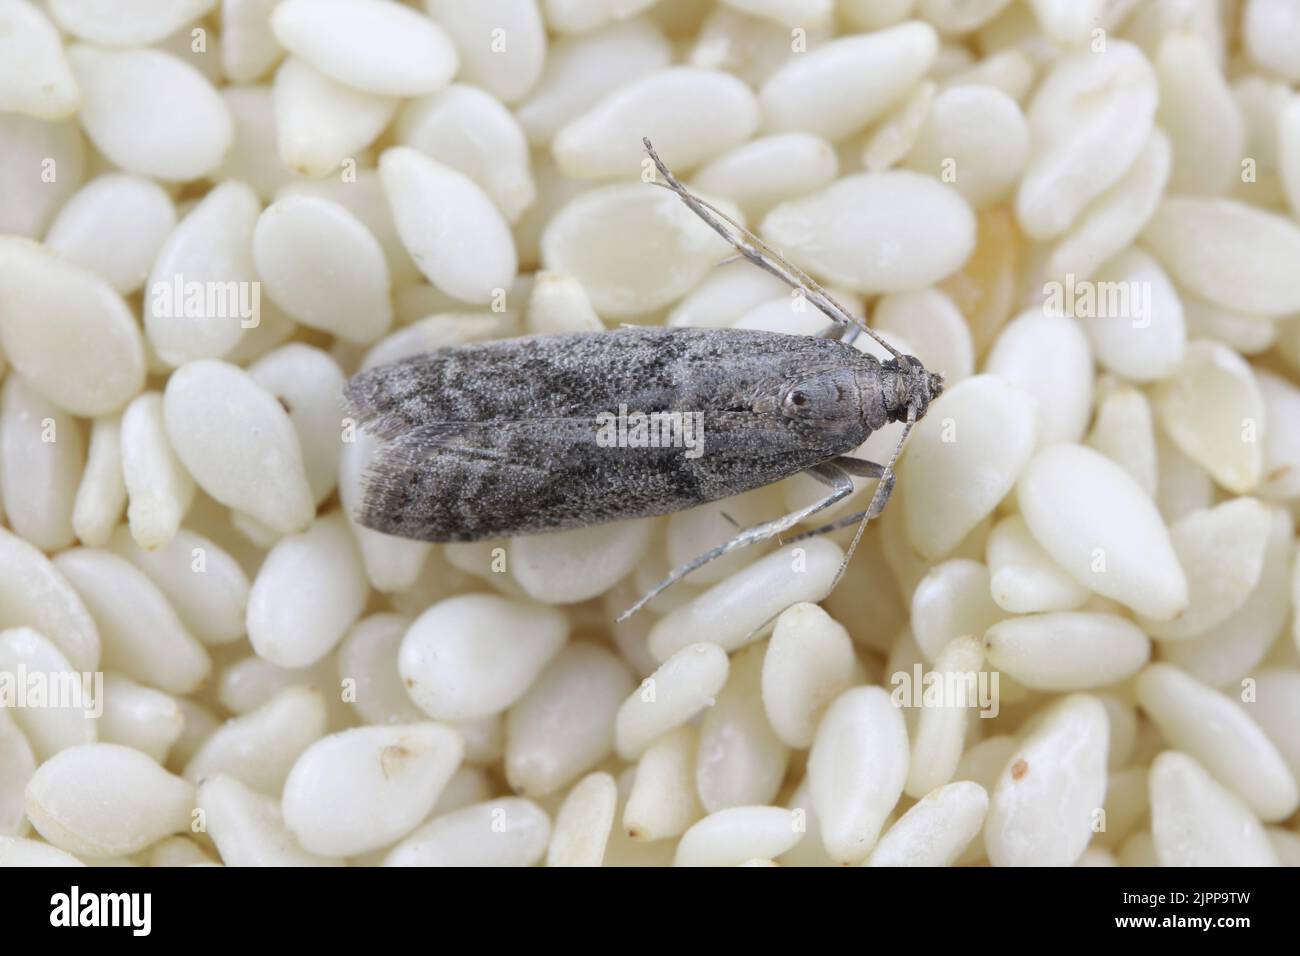 Detailed closeup on the small Tobacco Moth, Ephestia elutella - a common food pest. Color form with grey wings. Moth on sesame seeds. Stock Photo